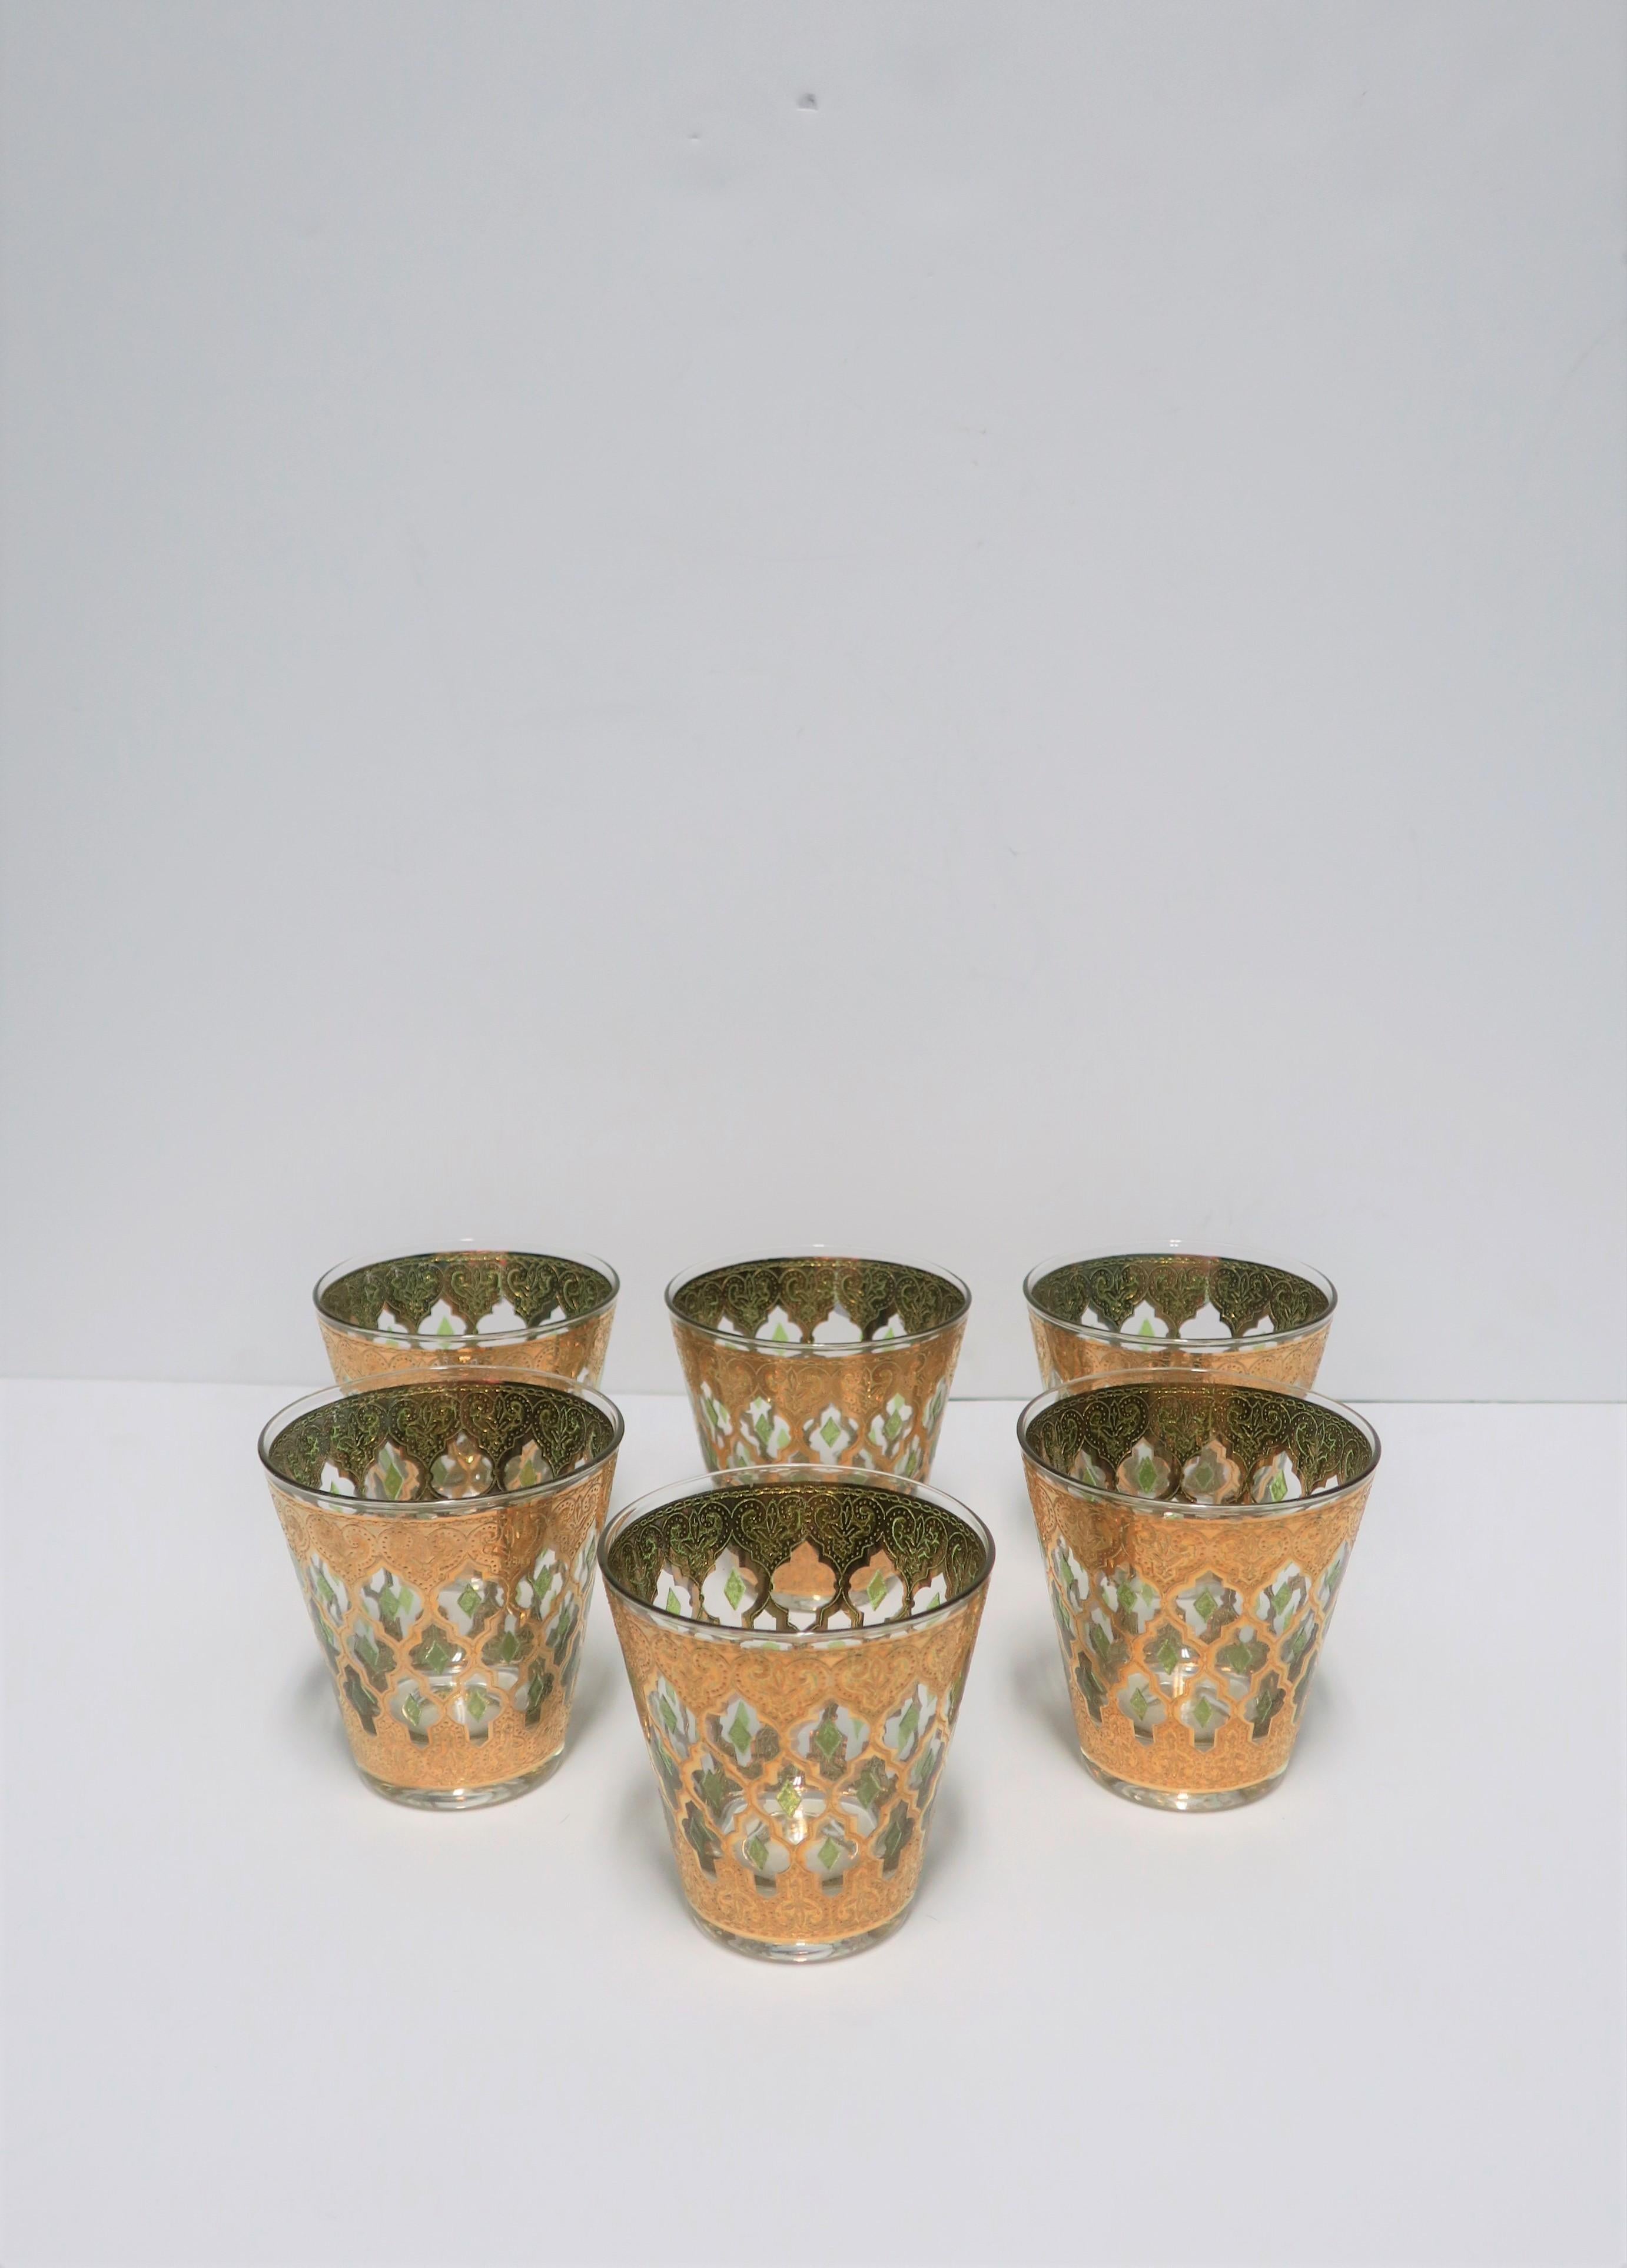 A beautiful set of 6 vintage Mid-20th century rocks' glasses with 22-karat gold and celadon green marque Moroccan or Moorish style design, circa 1960s, U.S. Great for entertaining, bar cart, or bar area. With maker's mark on each glass, please see